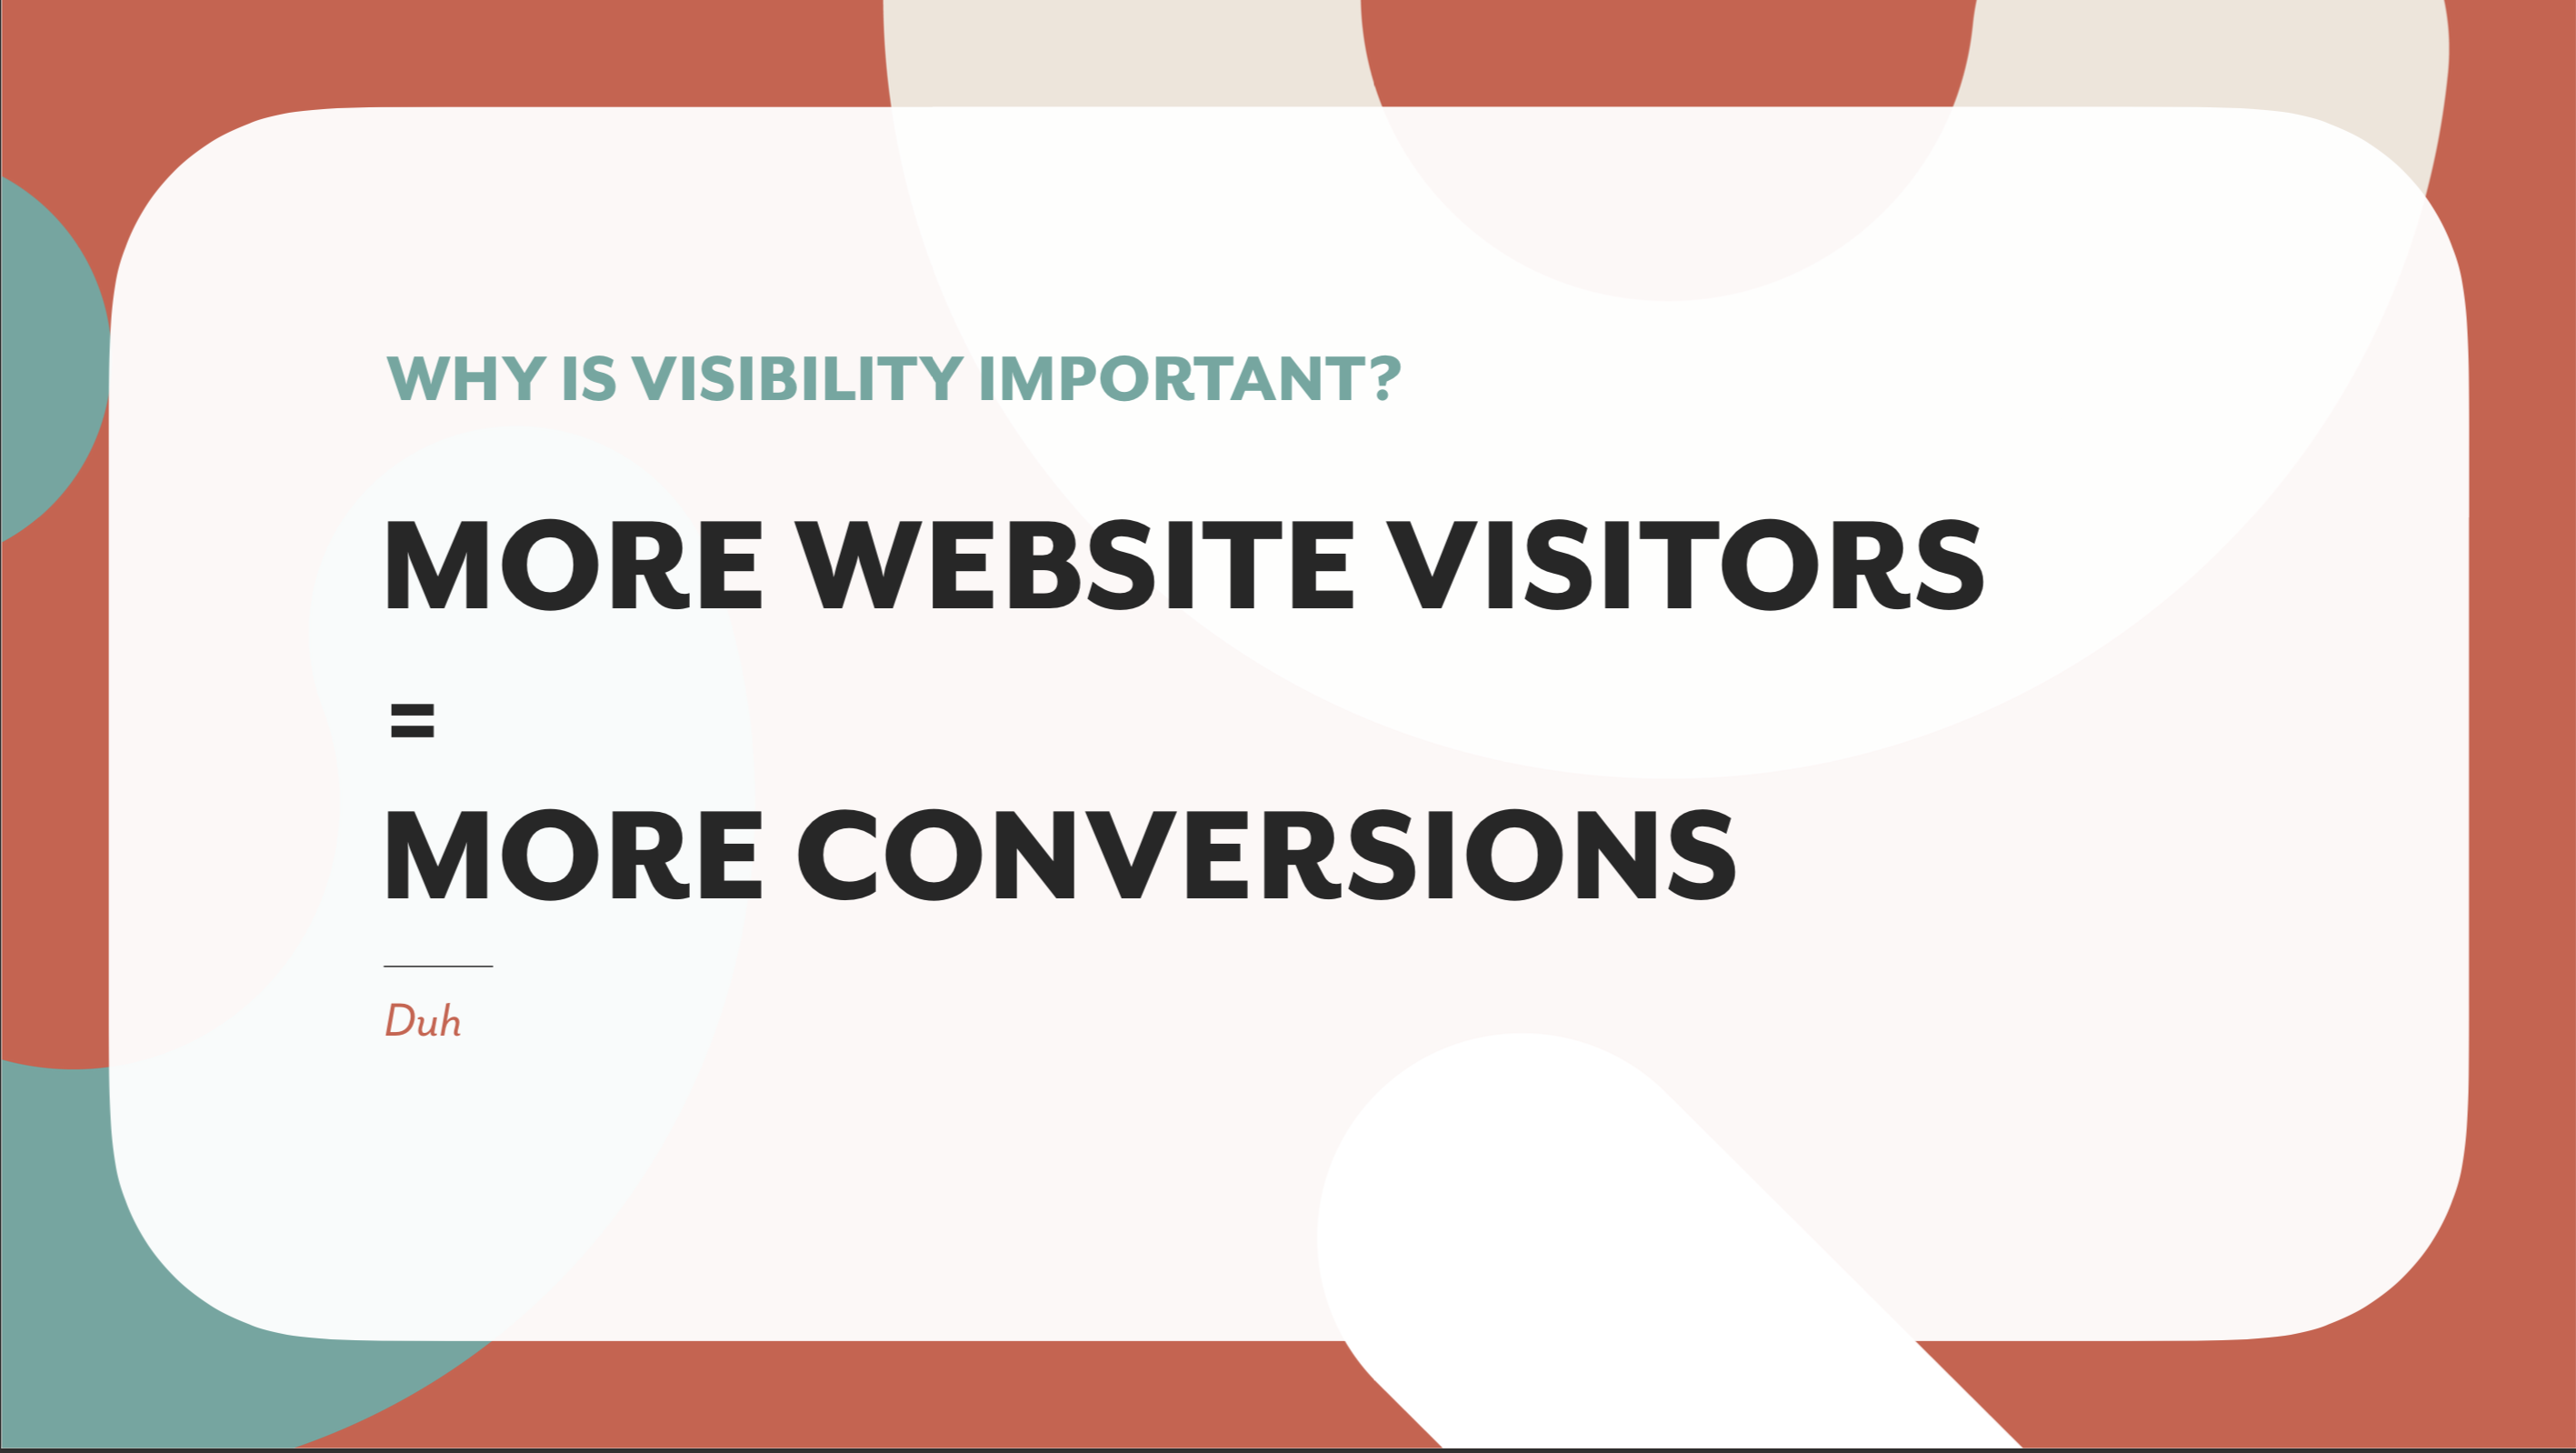 More visibility equals more conversions